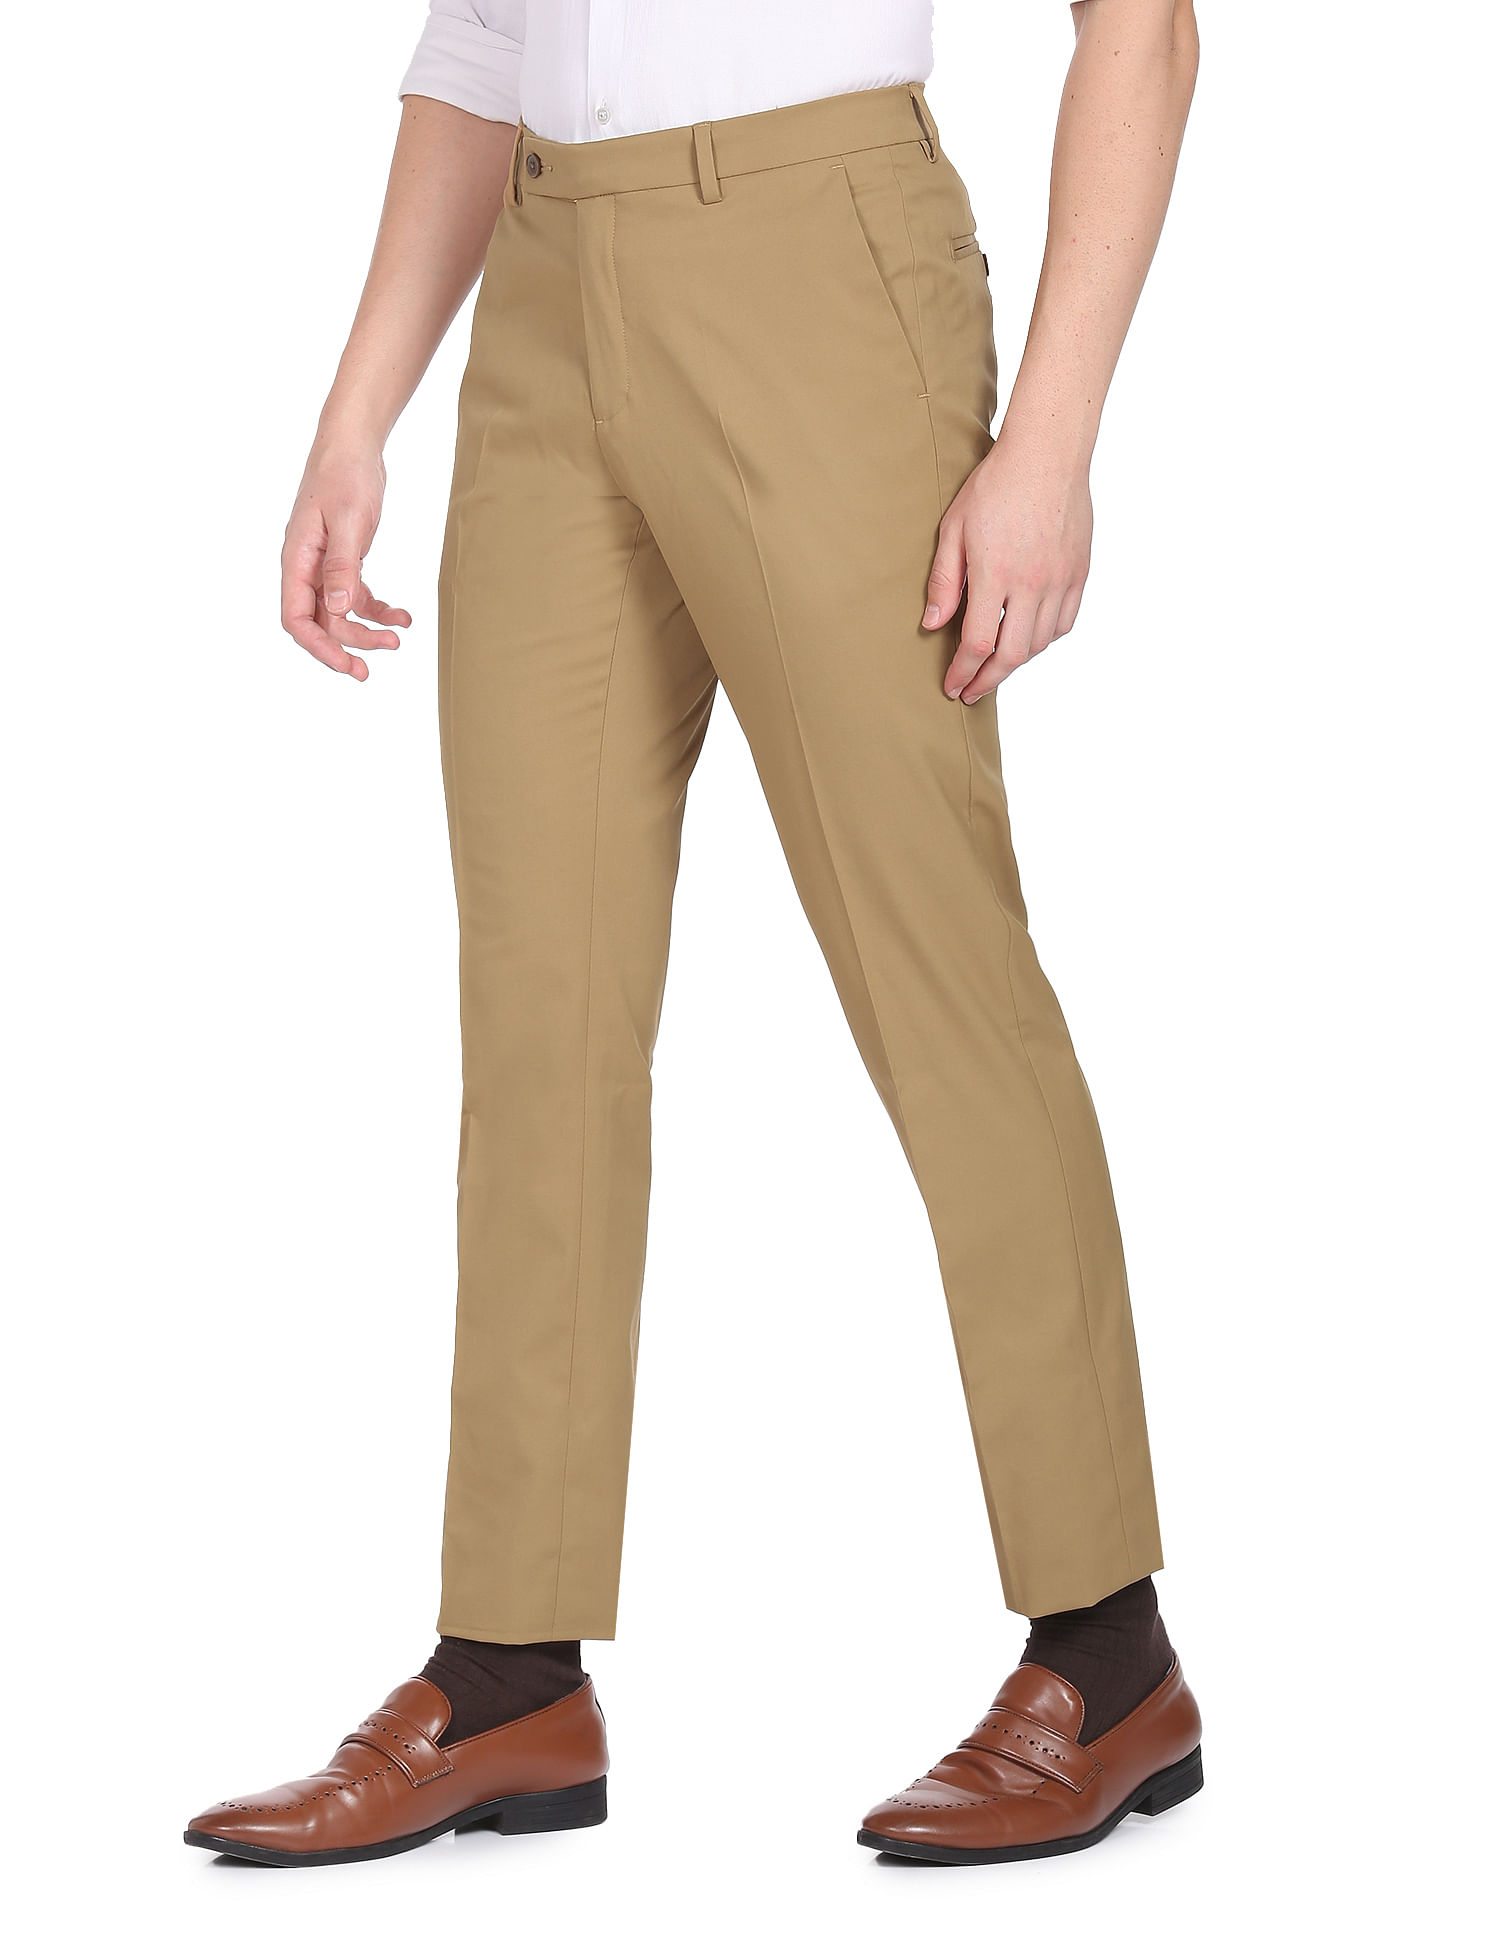 Buy Arrow Tailored Formal Trousers - NNNOW.com